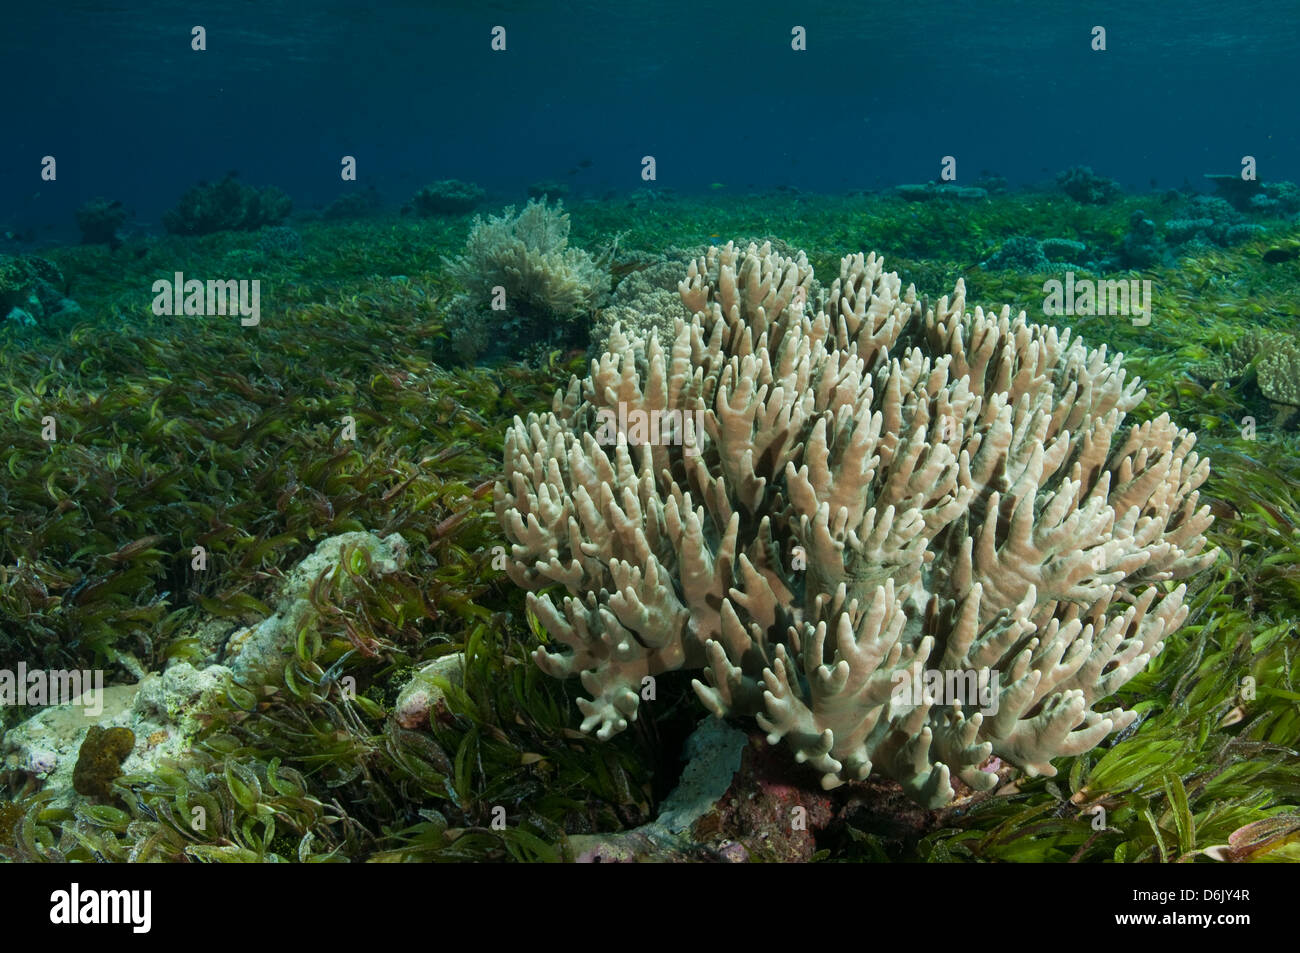 Leather coral on seagrass bed of reef flat Sulawesi Indonesia Stock Photo